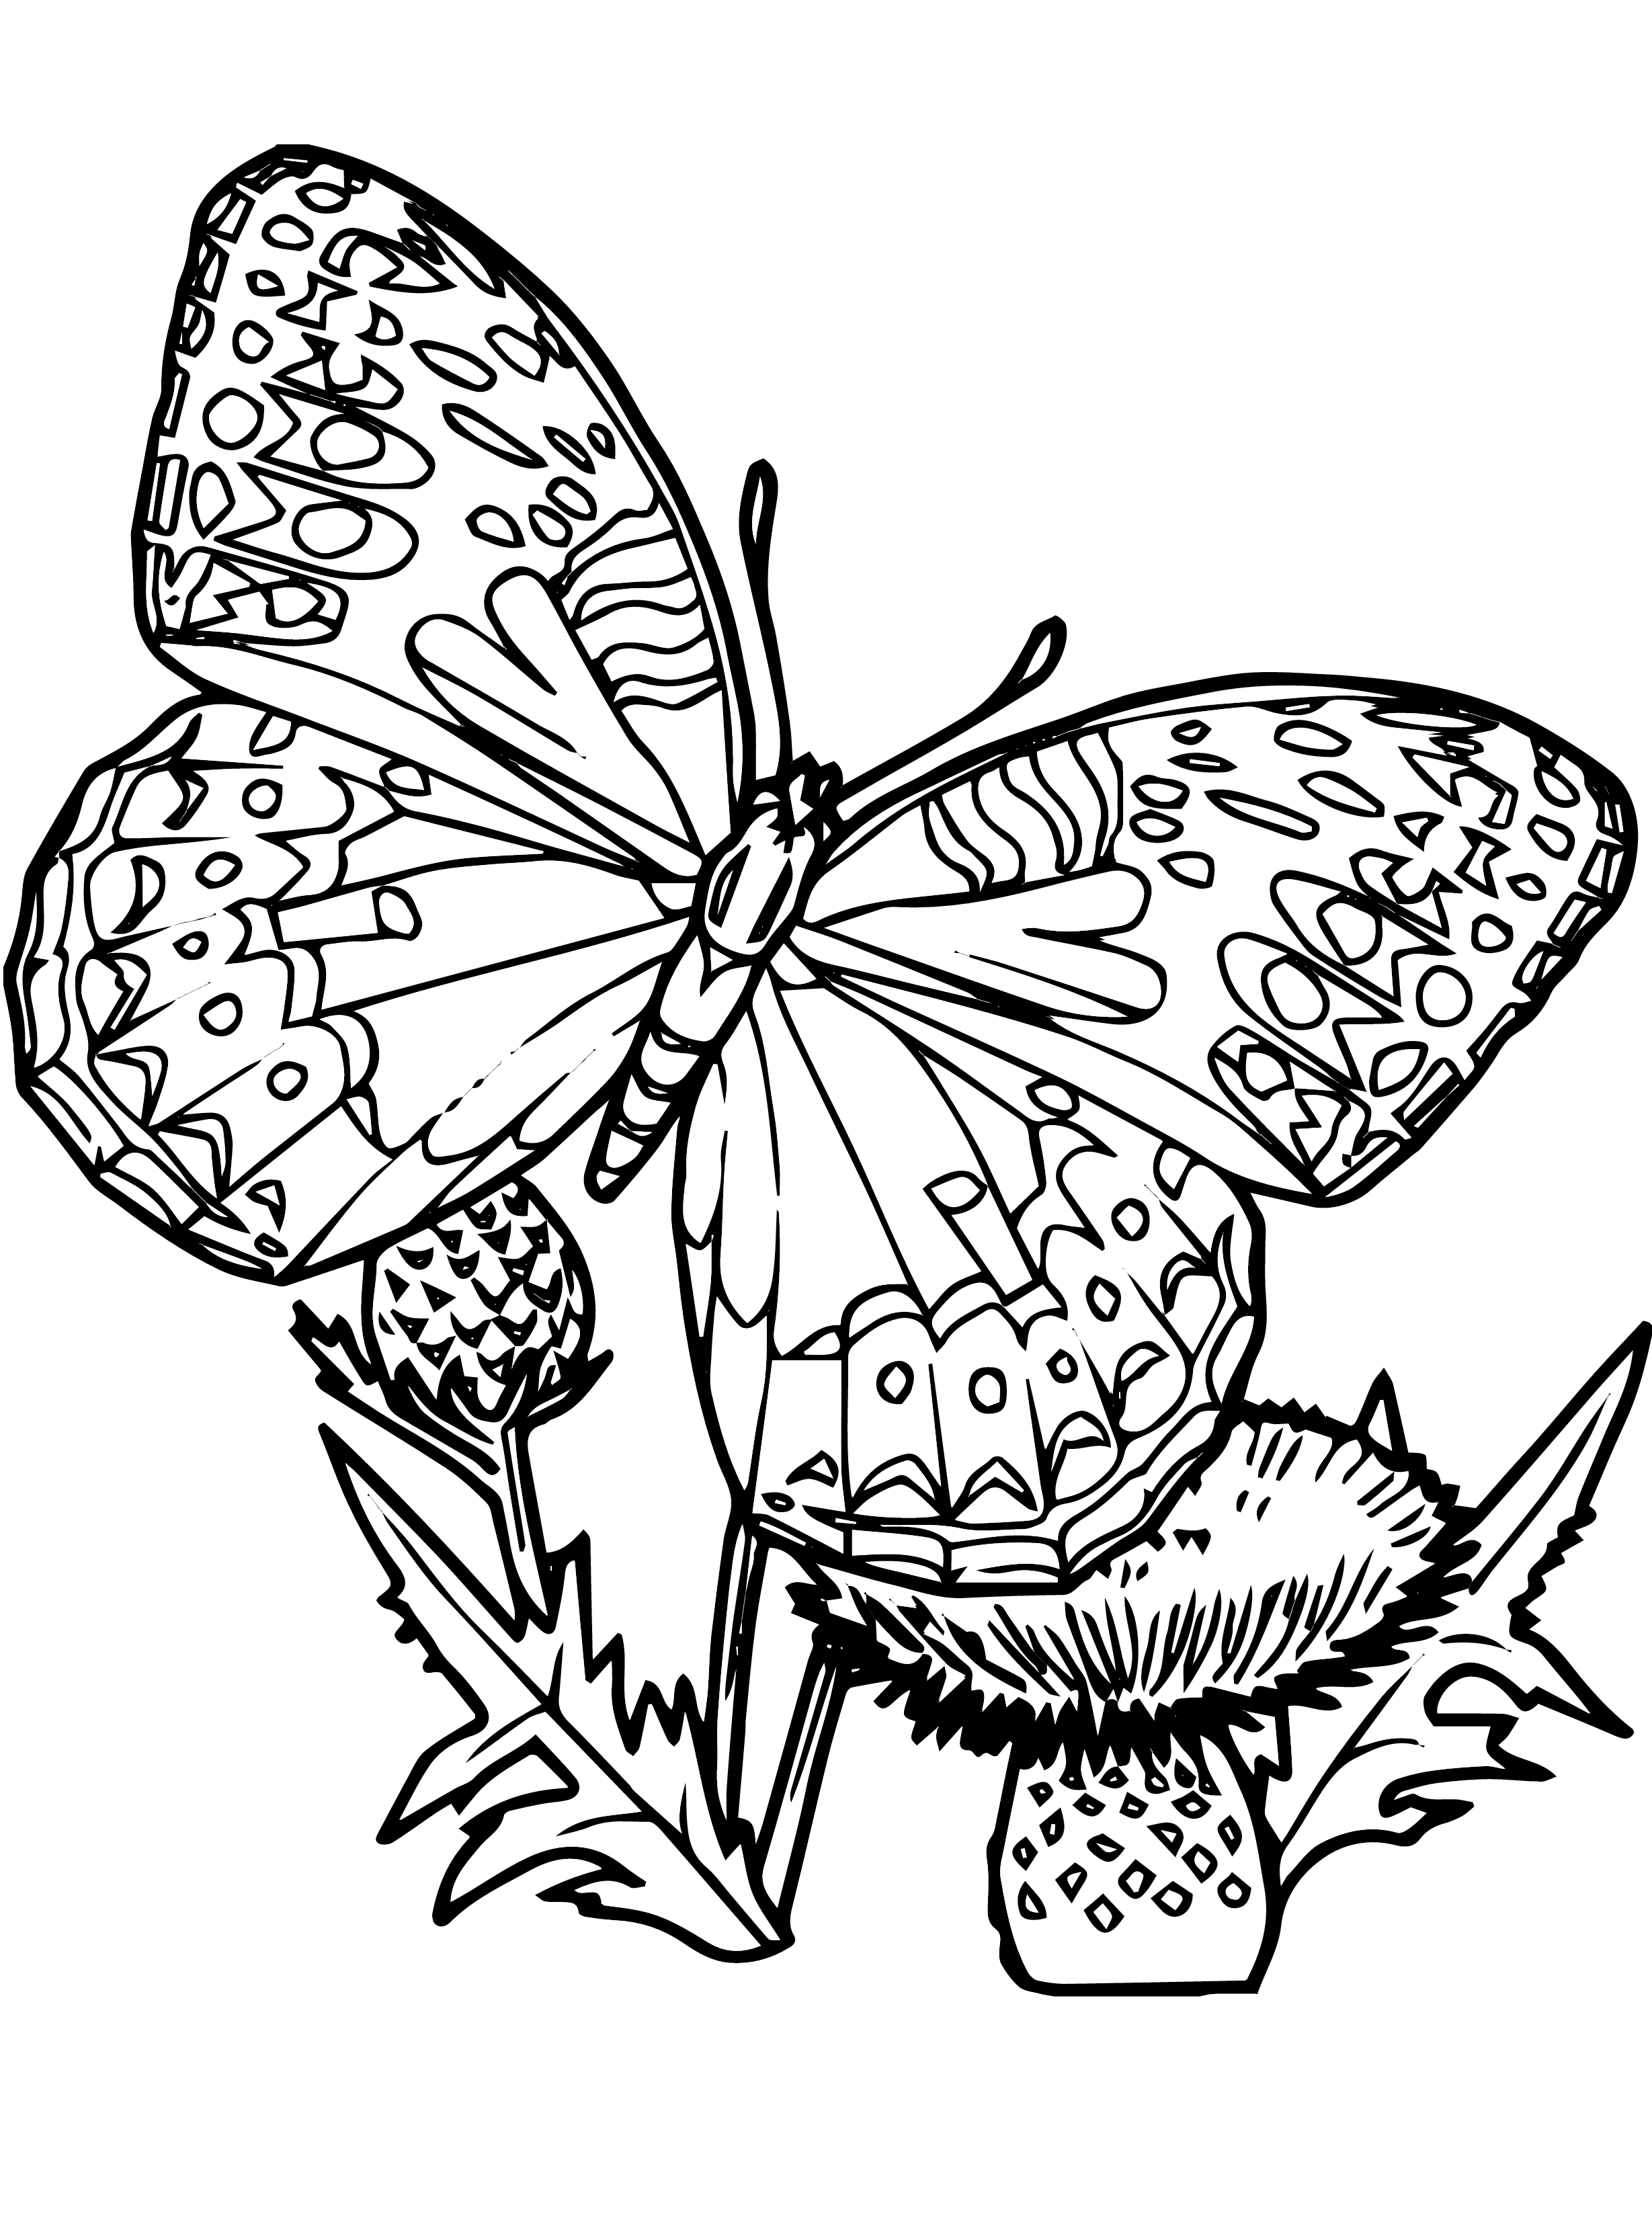 integrate-free-pages-butterflies-coloring-pages